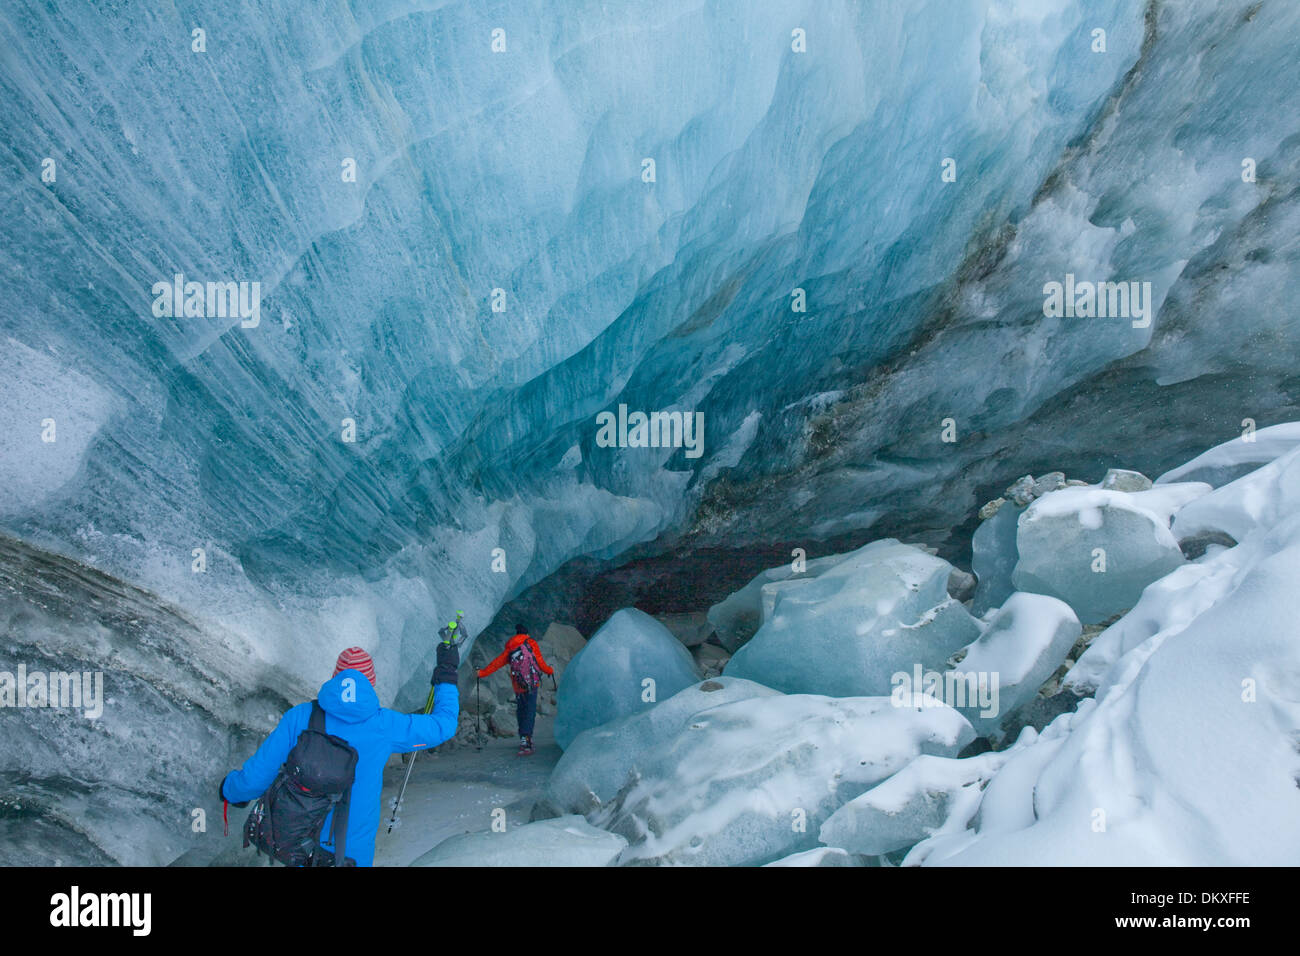 Switzerland Europe winter canton Valais Zinal Val d'Anniviers ice glacier ice mouth of glacier walking hiking adventure Stock Photo